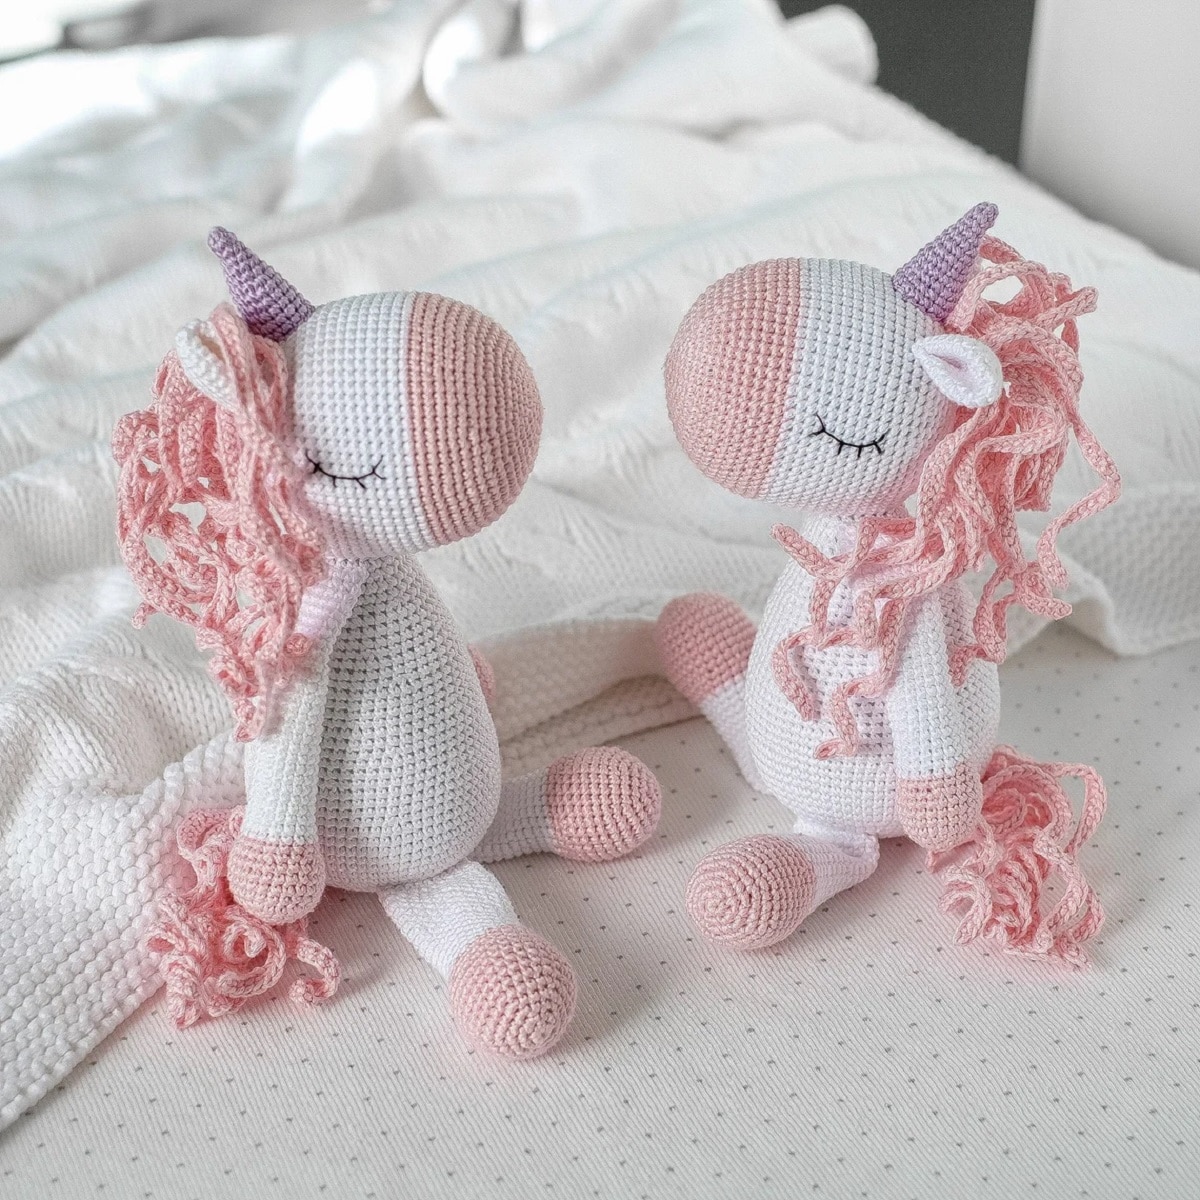 Two white crochet unicorns with pink noses, feet, curled manes, and purple horns sitting on a white blanket facing each other.